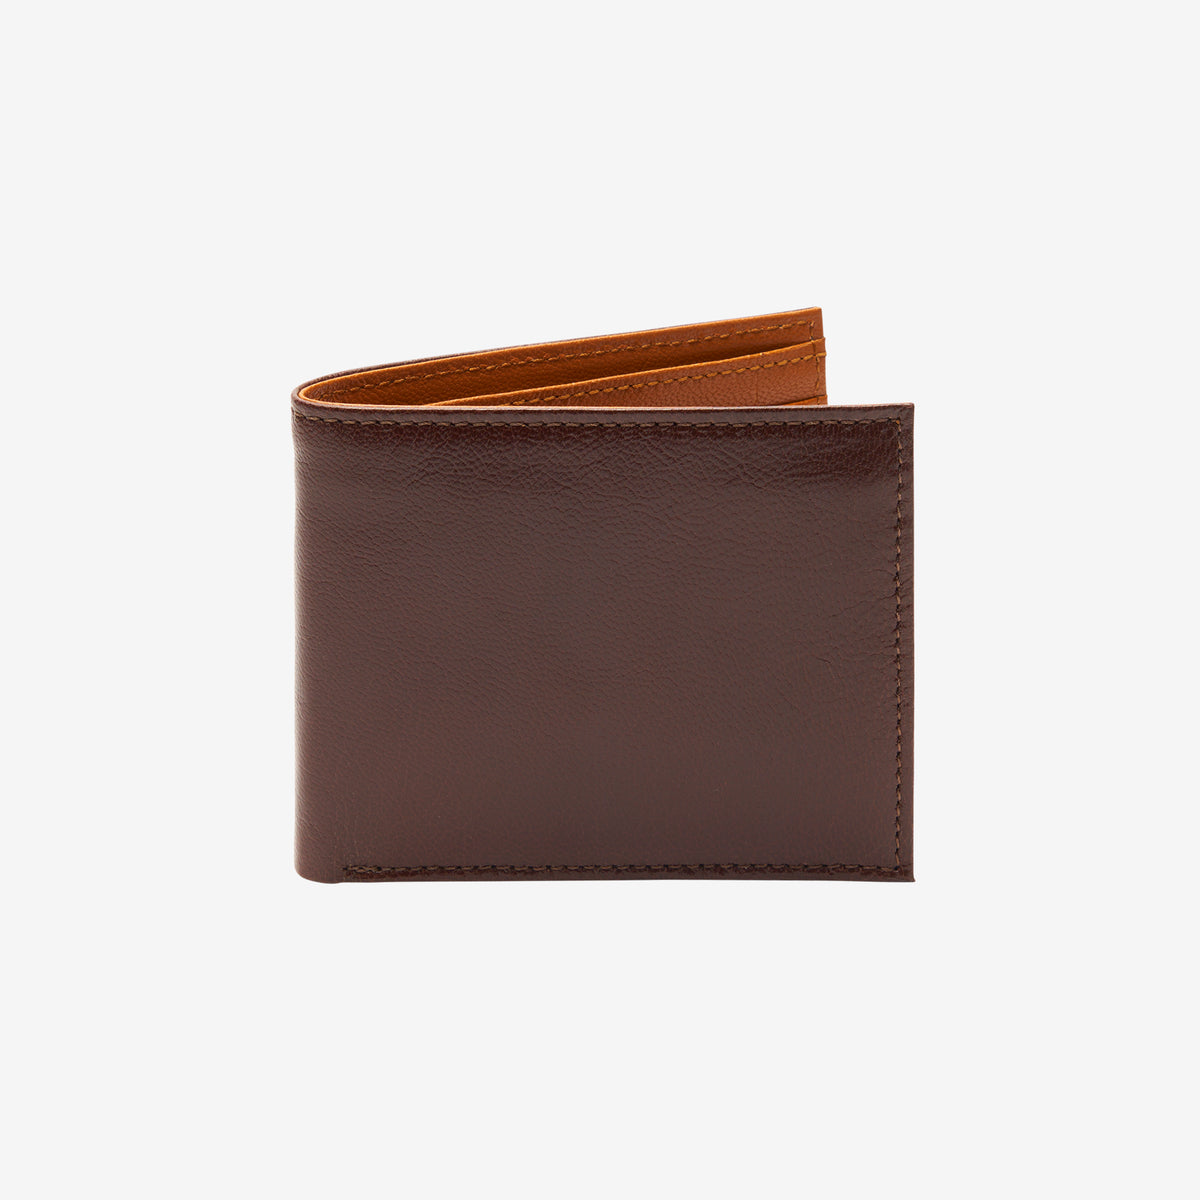 tusk-104-mens-compact-billfold-wallet-cafe-and-oak-front